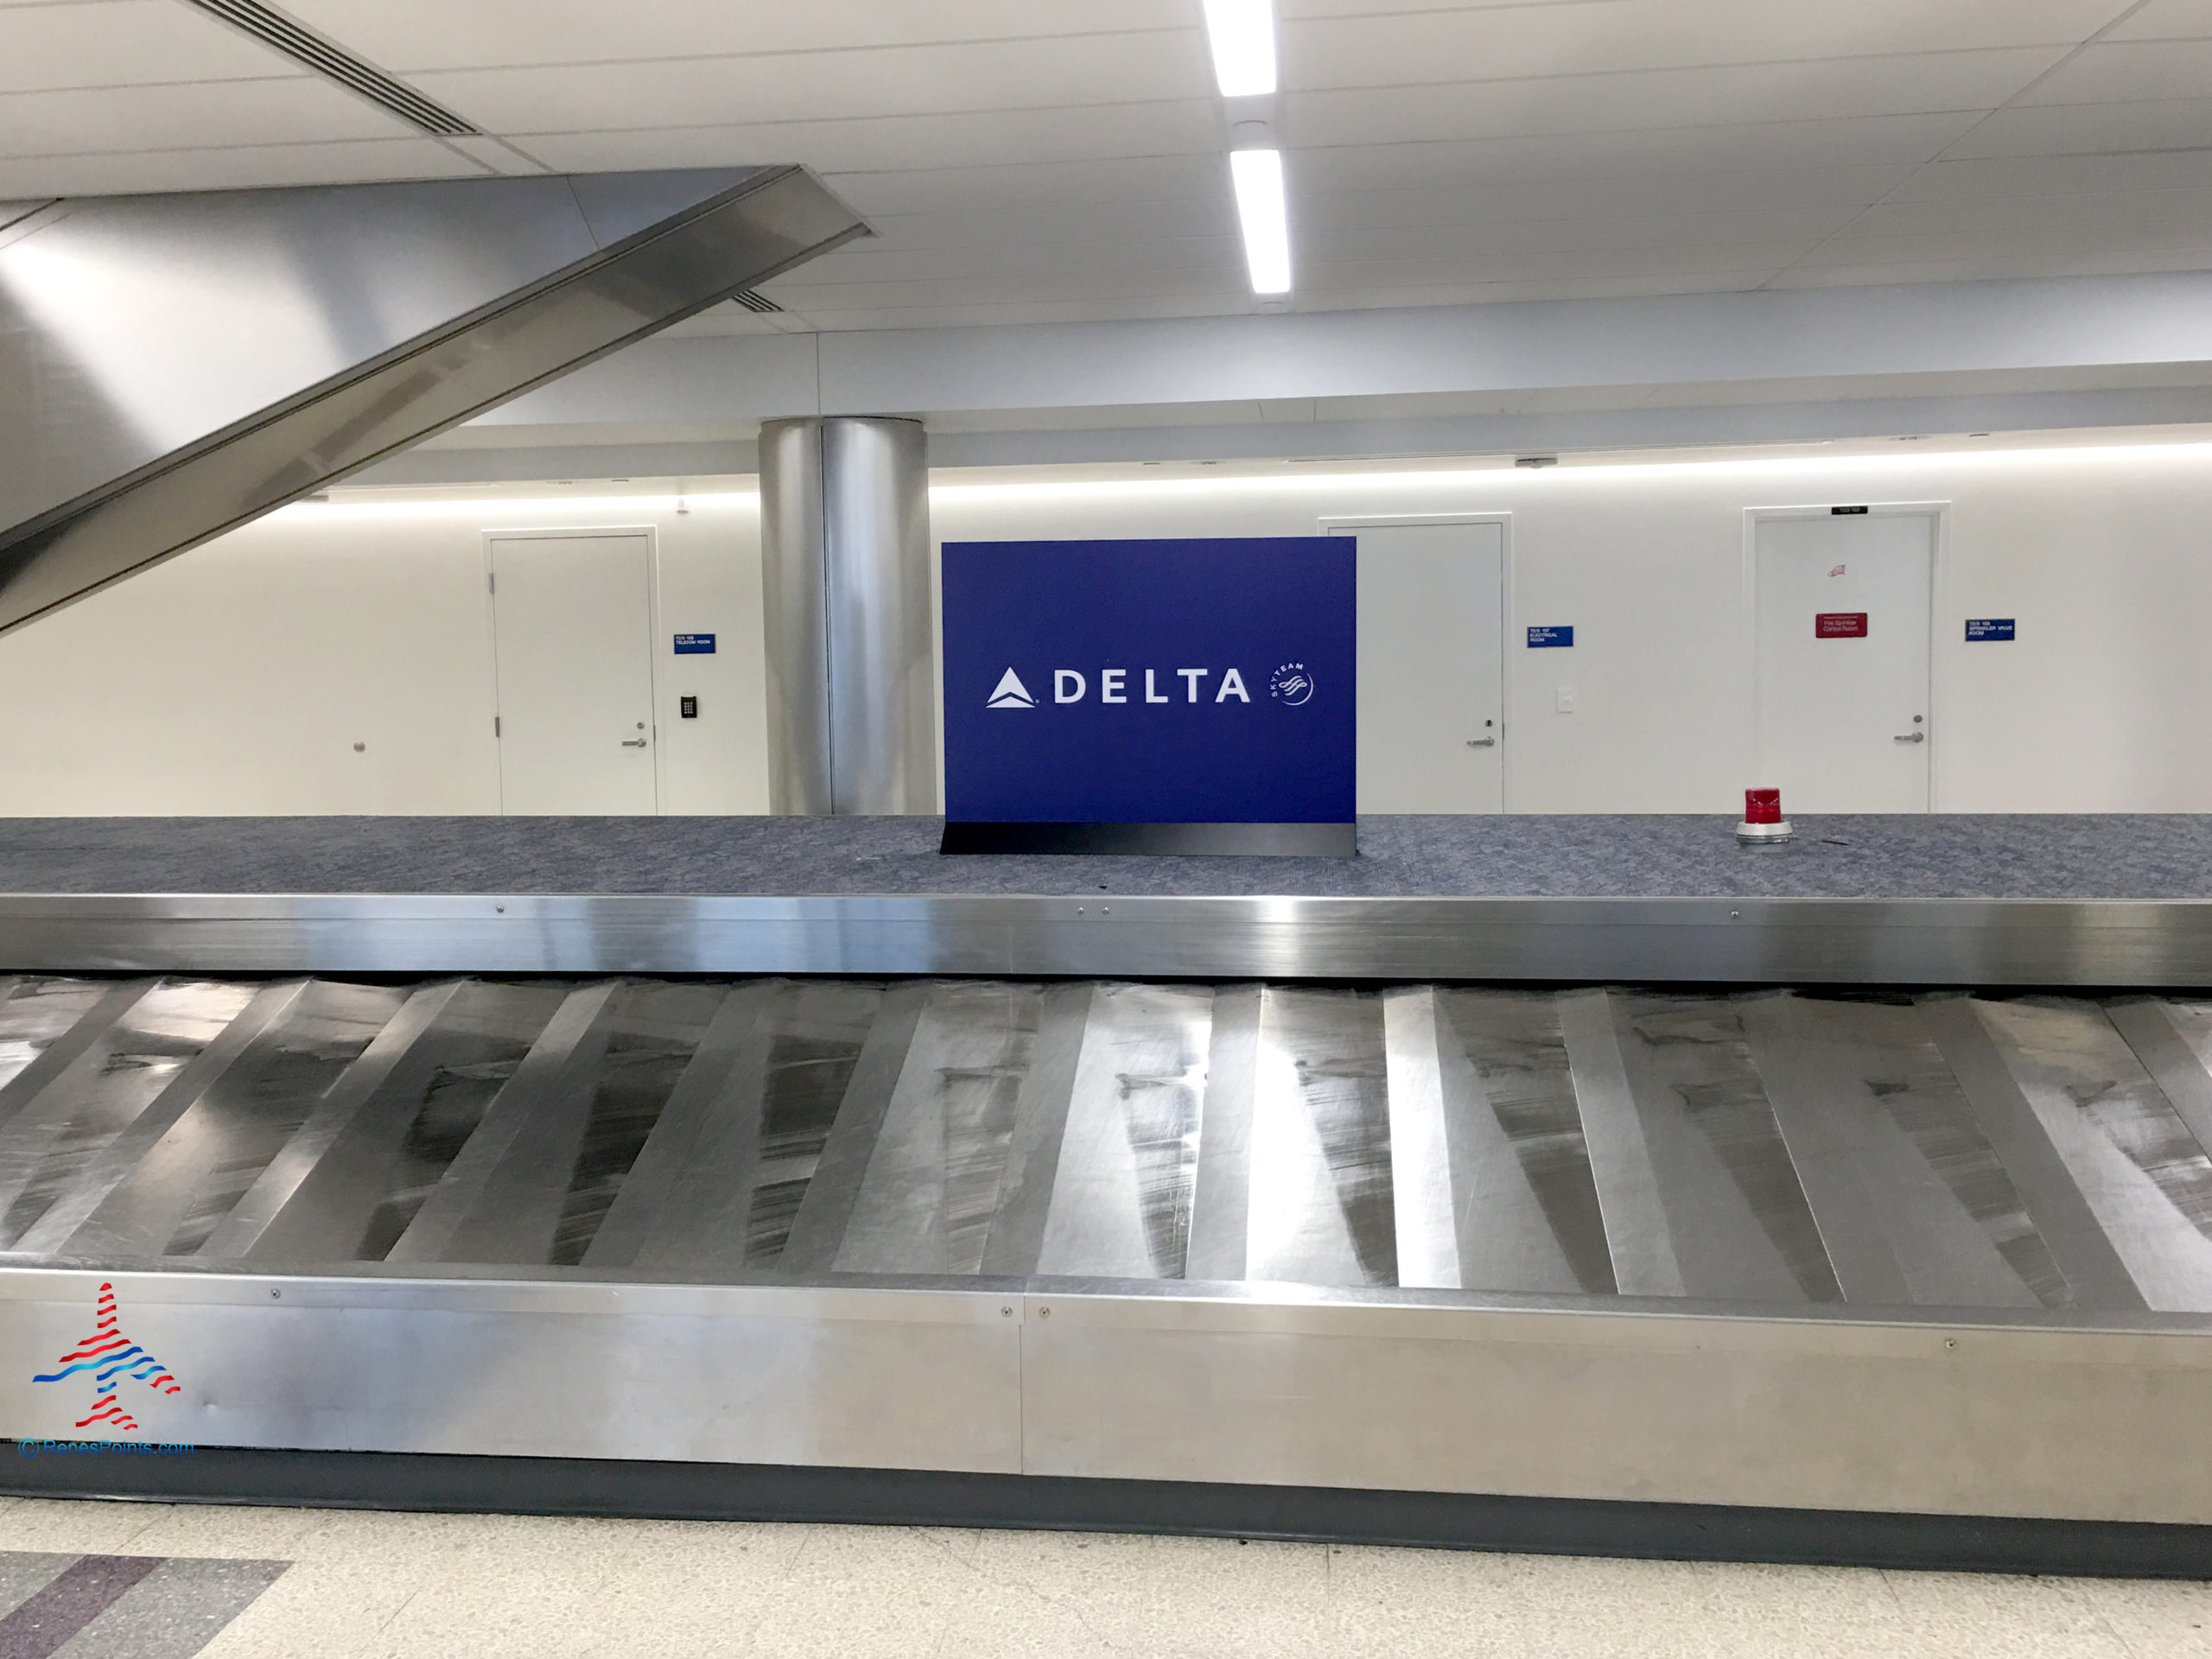 Delta luggage carousel at LAX